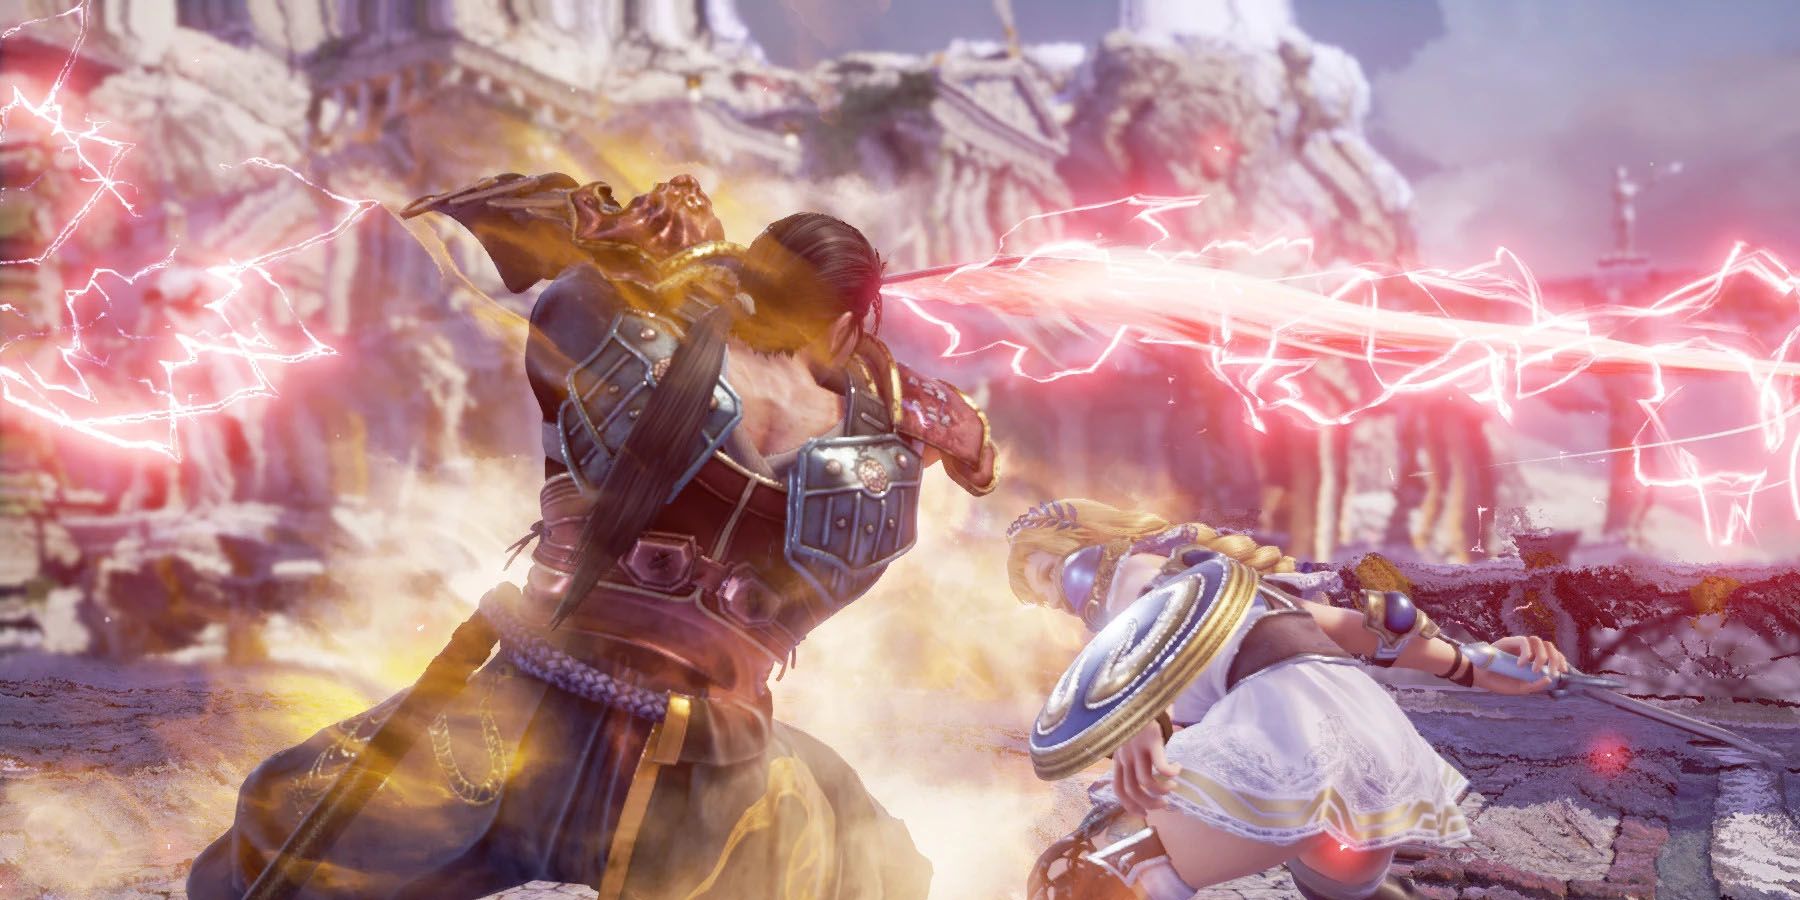 A Charge Attack in Soulcalibur 6